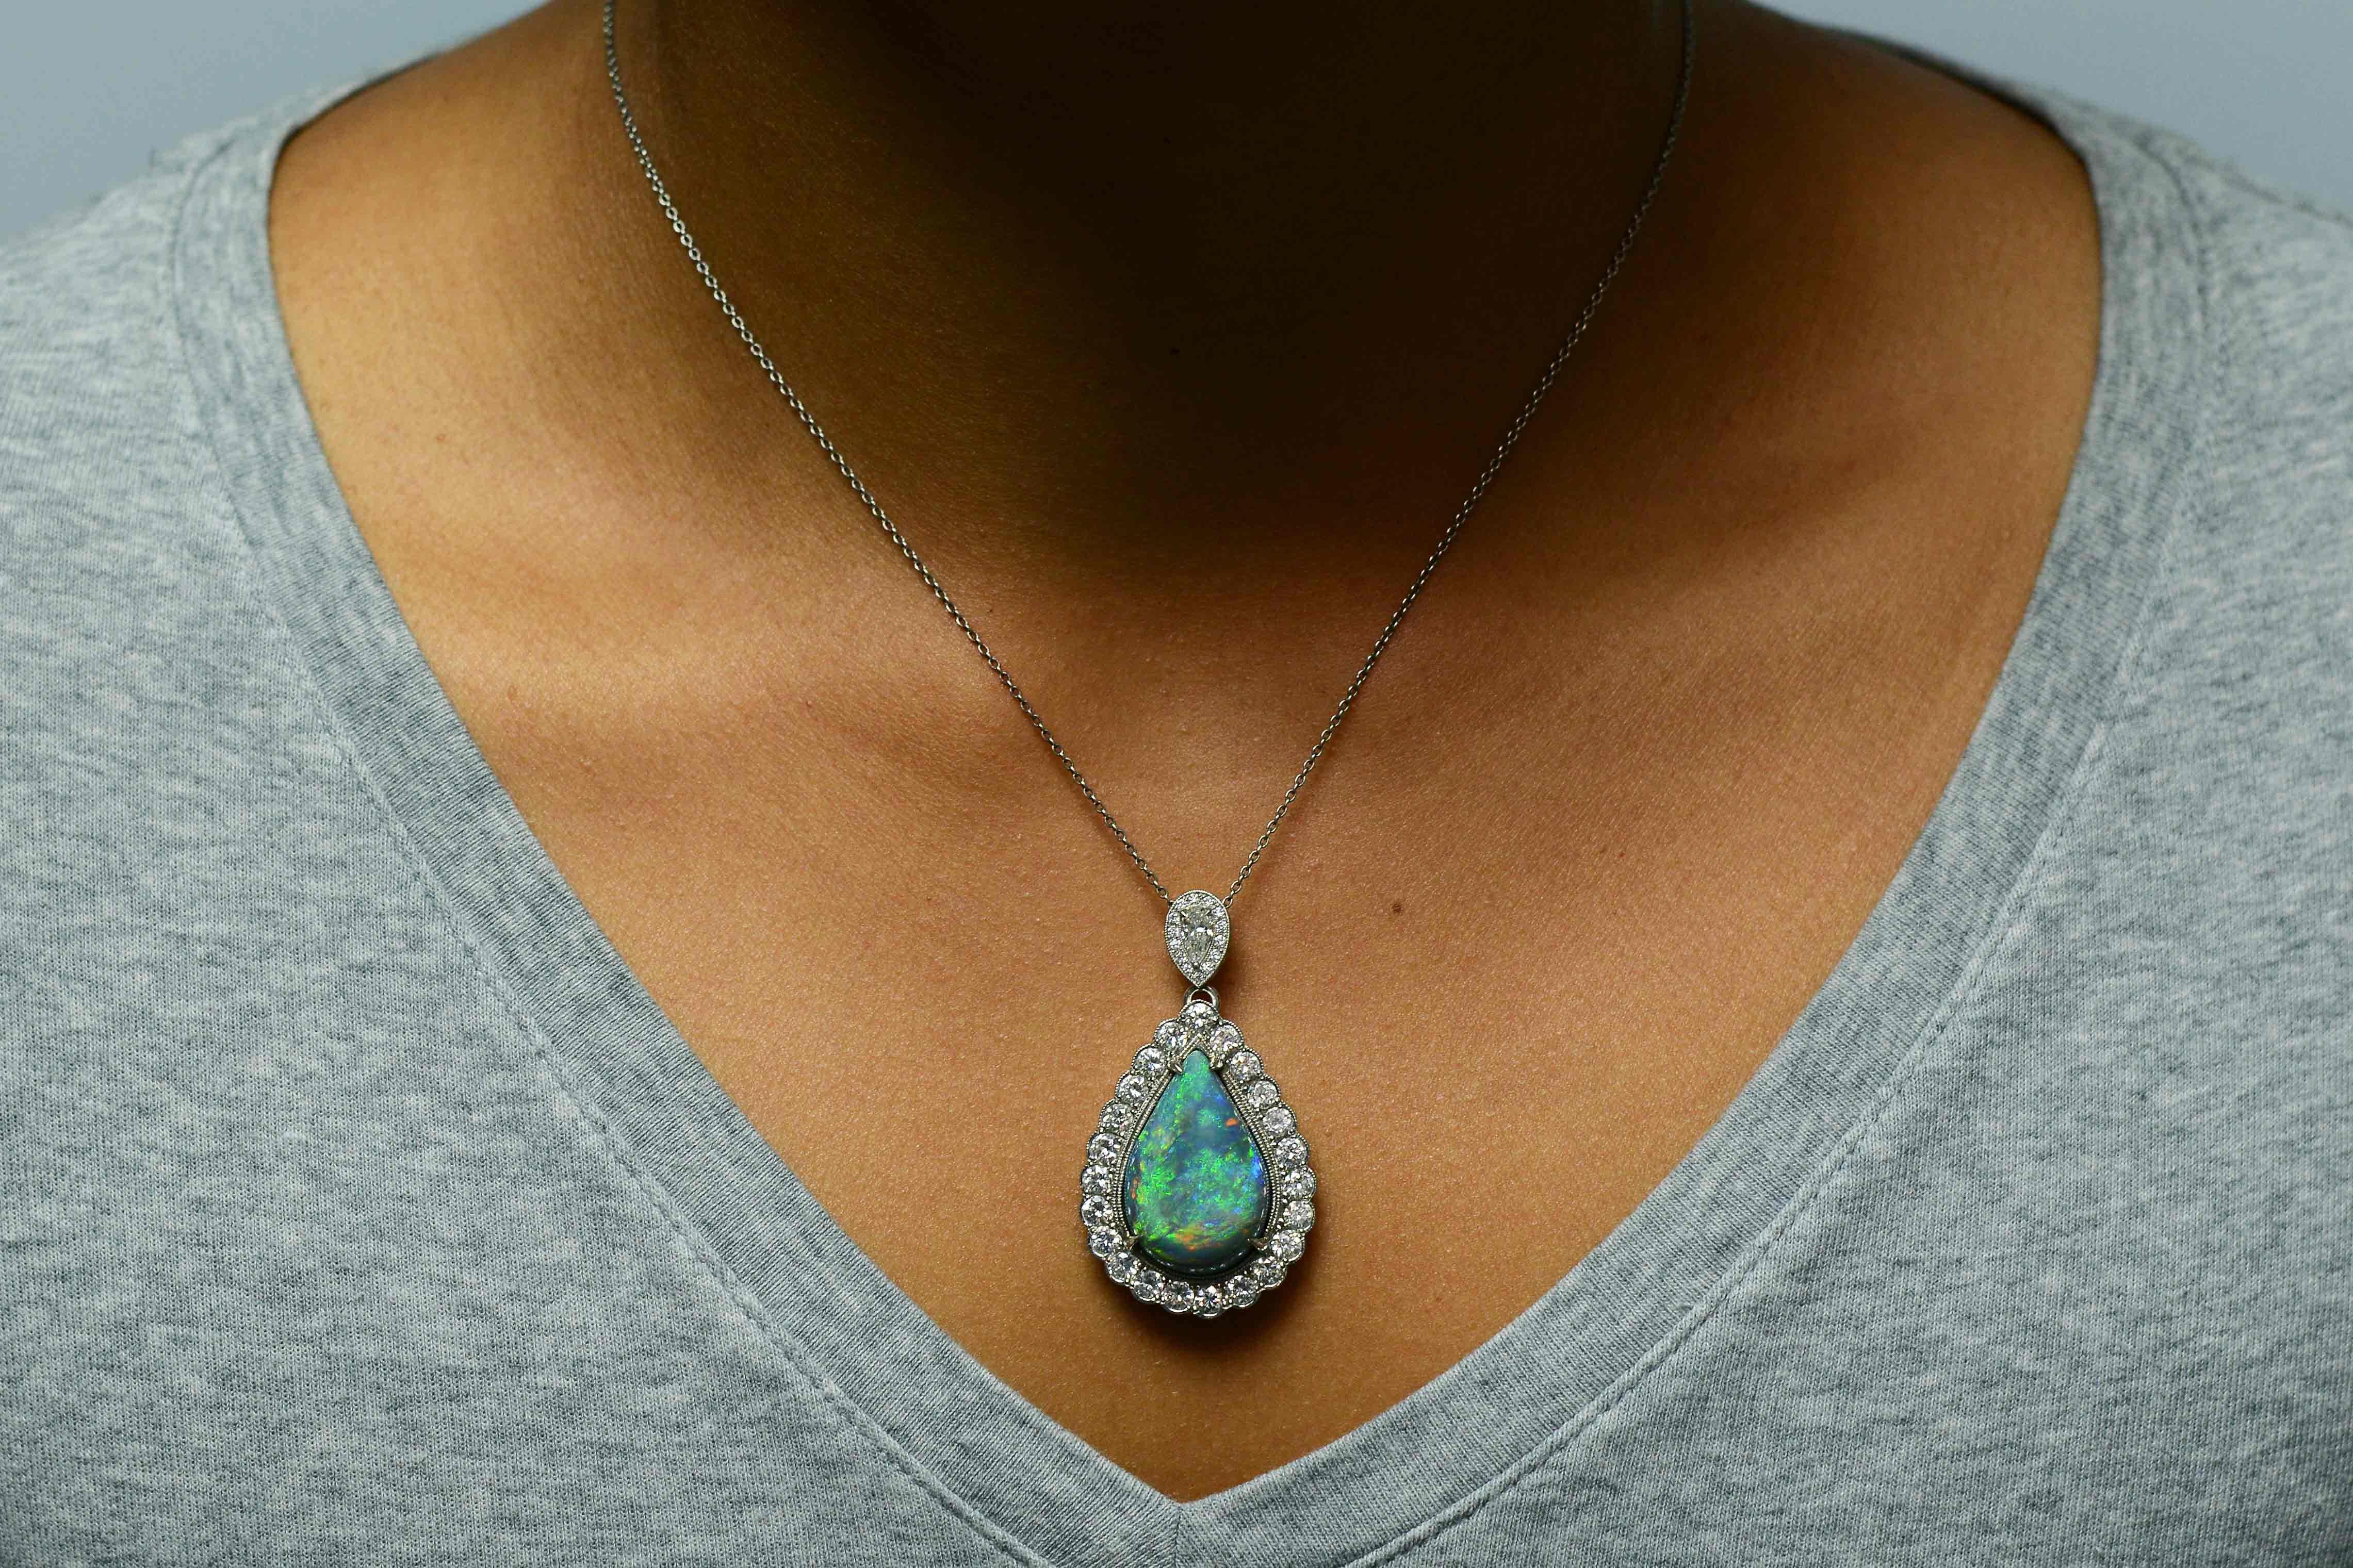 A highly important 16 carat black opal & diamond necklace. The pear shape, teardrop pendant artfully designed as a night on the town statement jewel. Hailed for their unusual and stunning beauty, black opals are the rarest and highly sought after